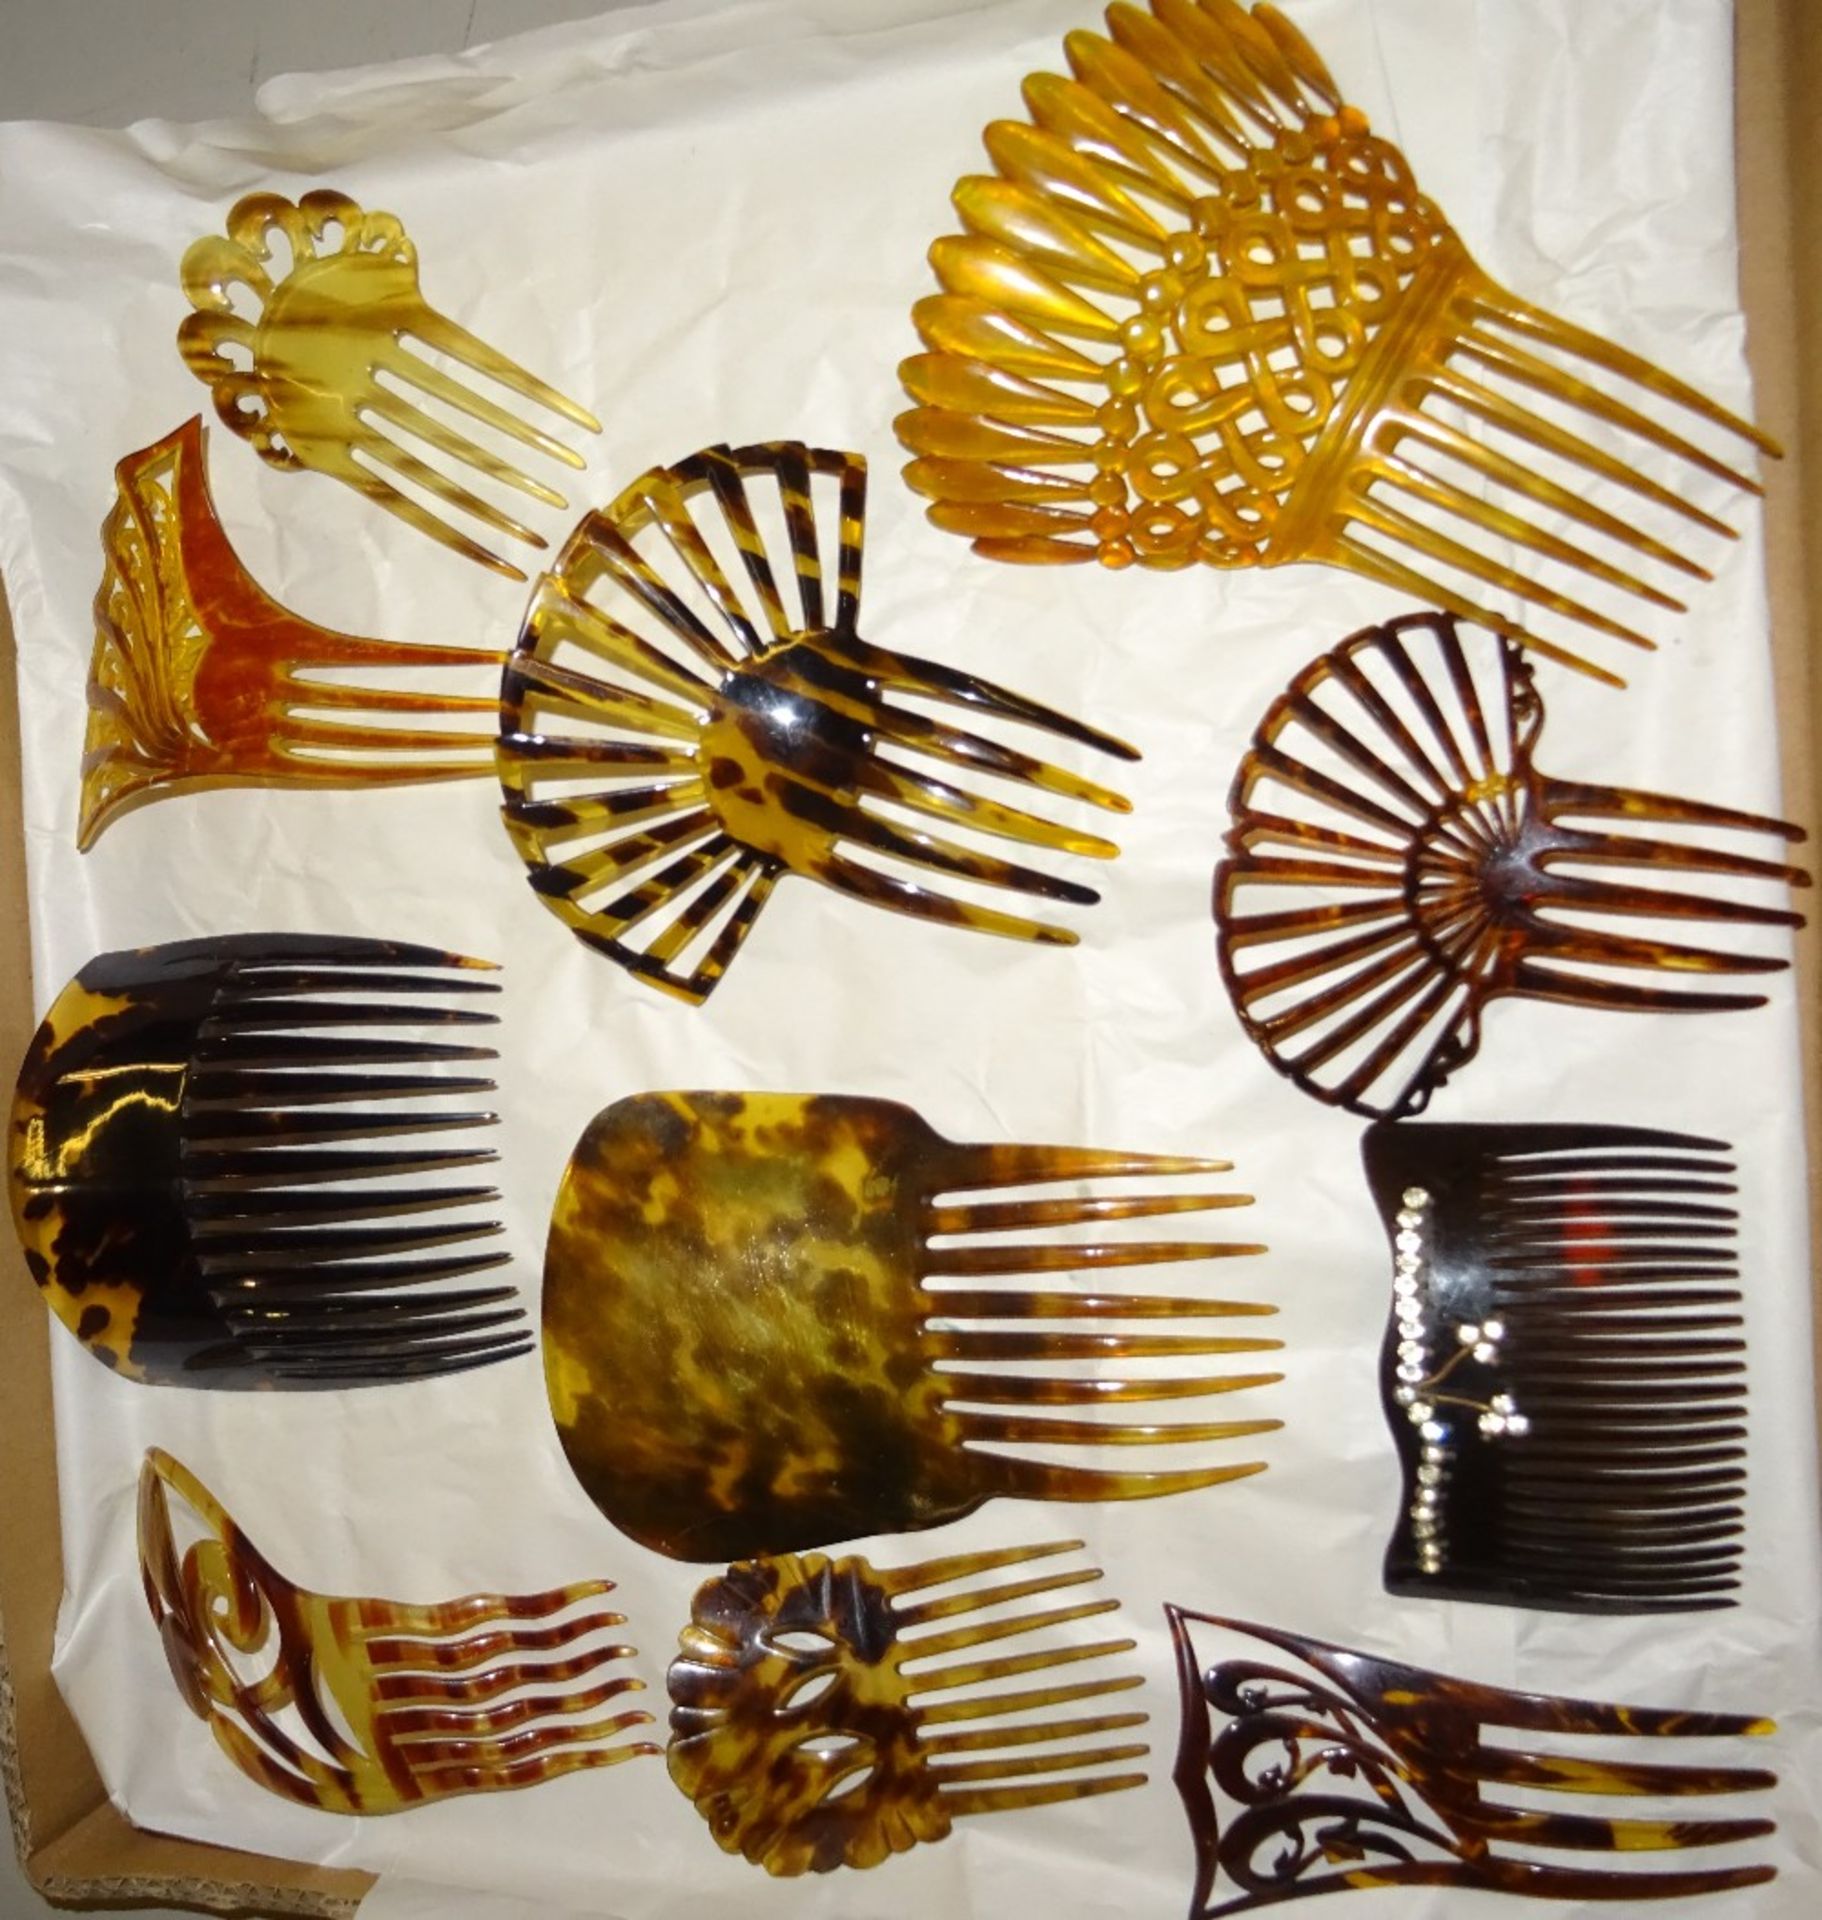 THREE OF 11 VINTAGE TORTOISHELL AND OTHER HAIR COMBS